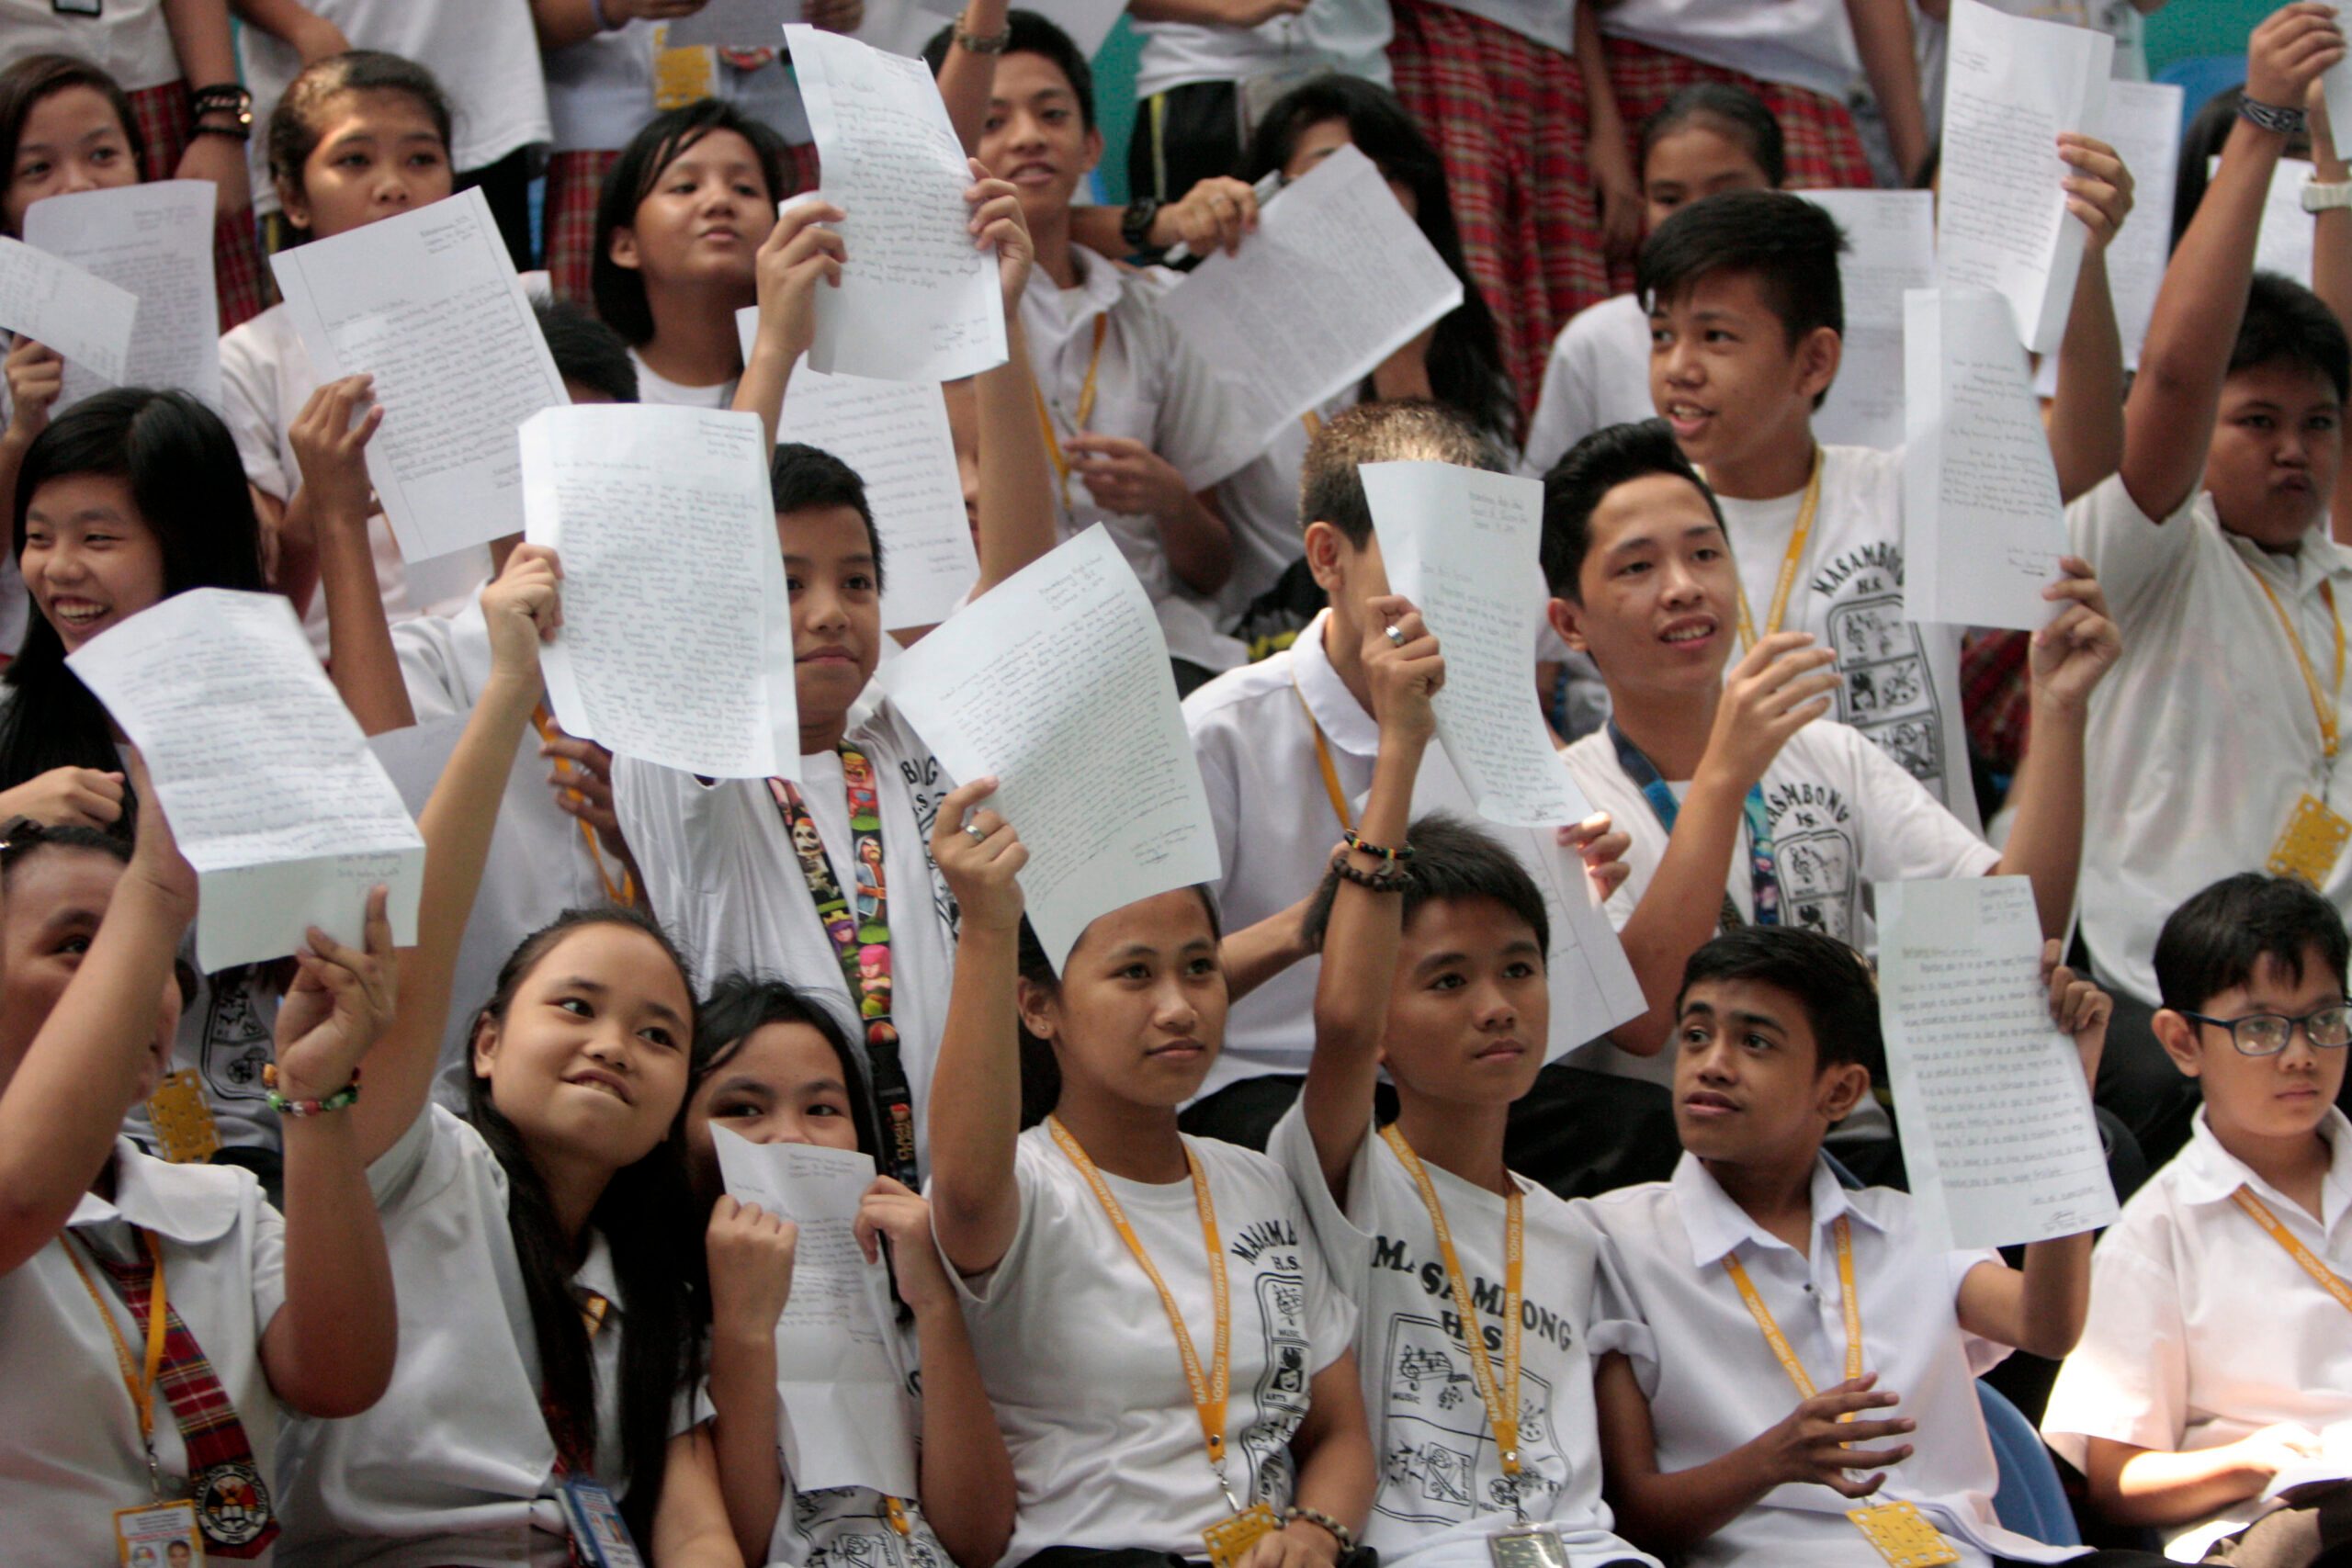 #DearNextPresident: Youth’s message to the future PH leader